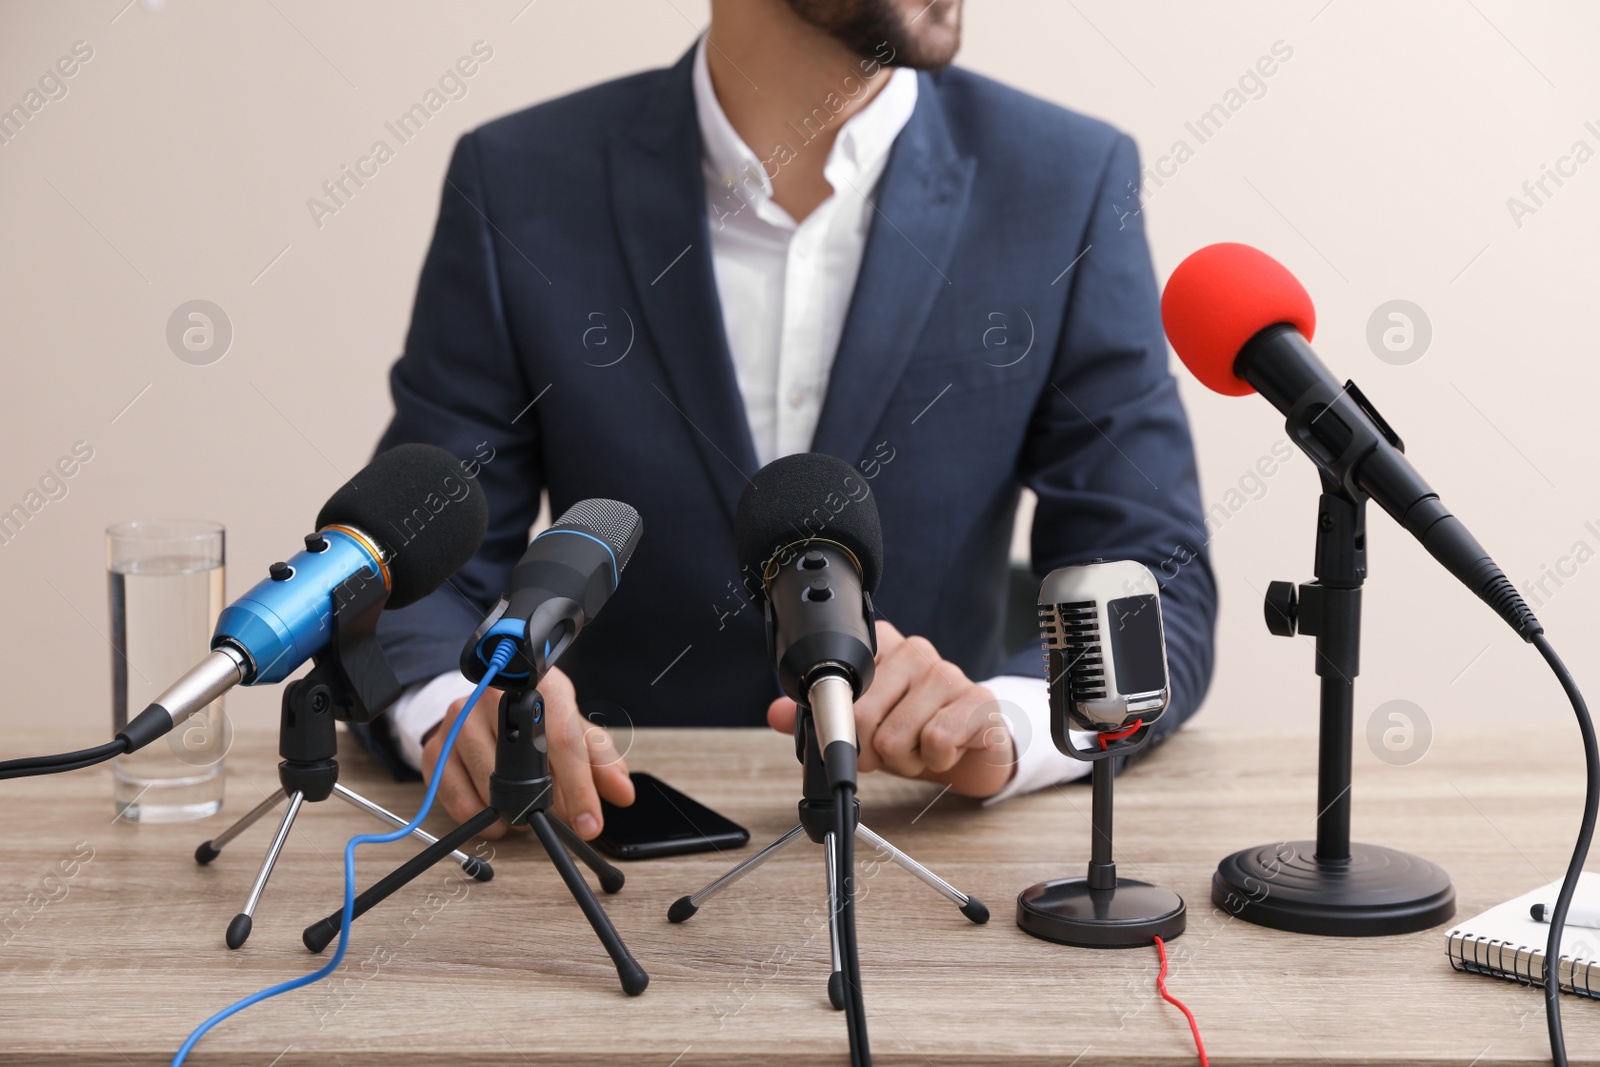 Photo of Businessman giving interview at table with microphones, closeup. Journalist conference